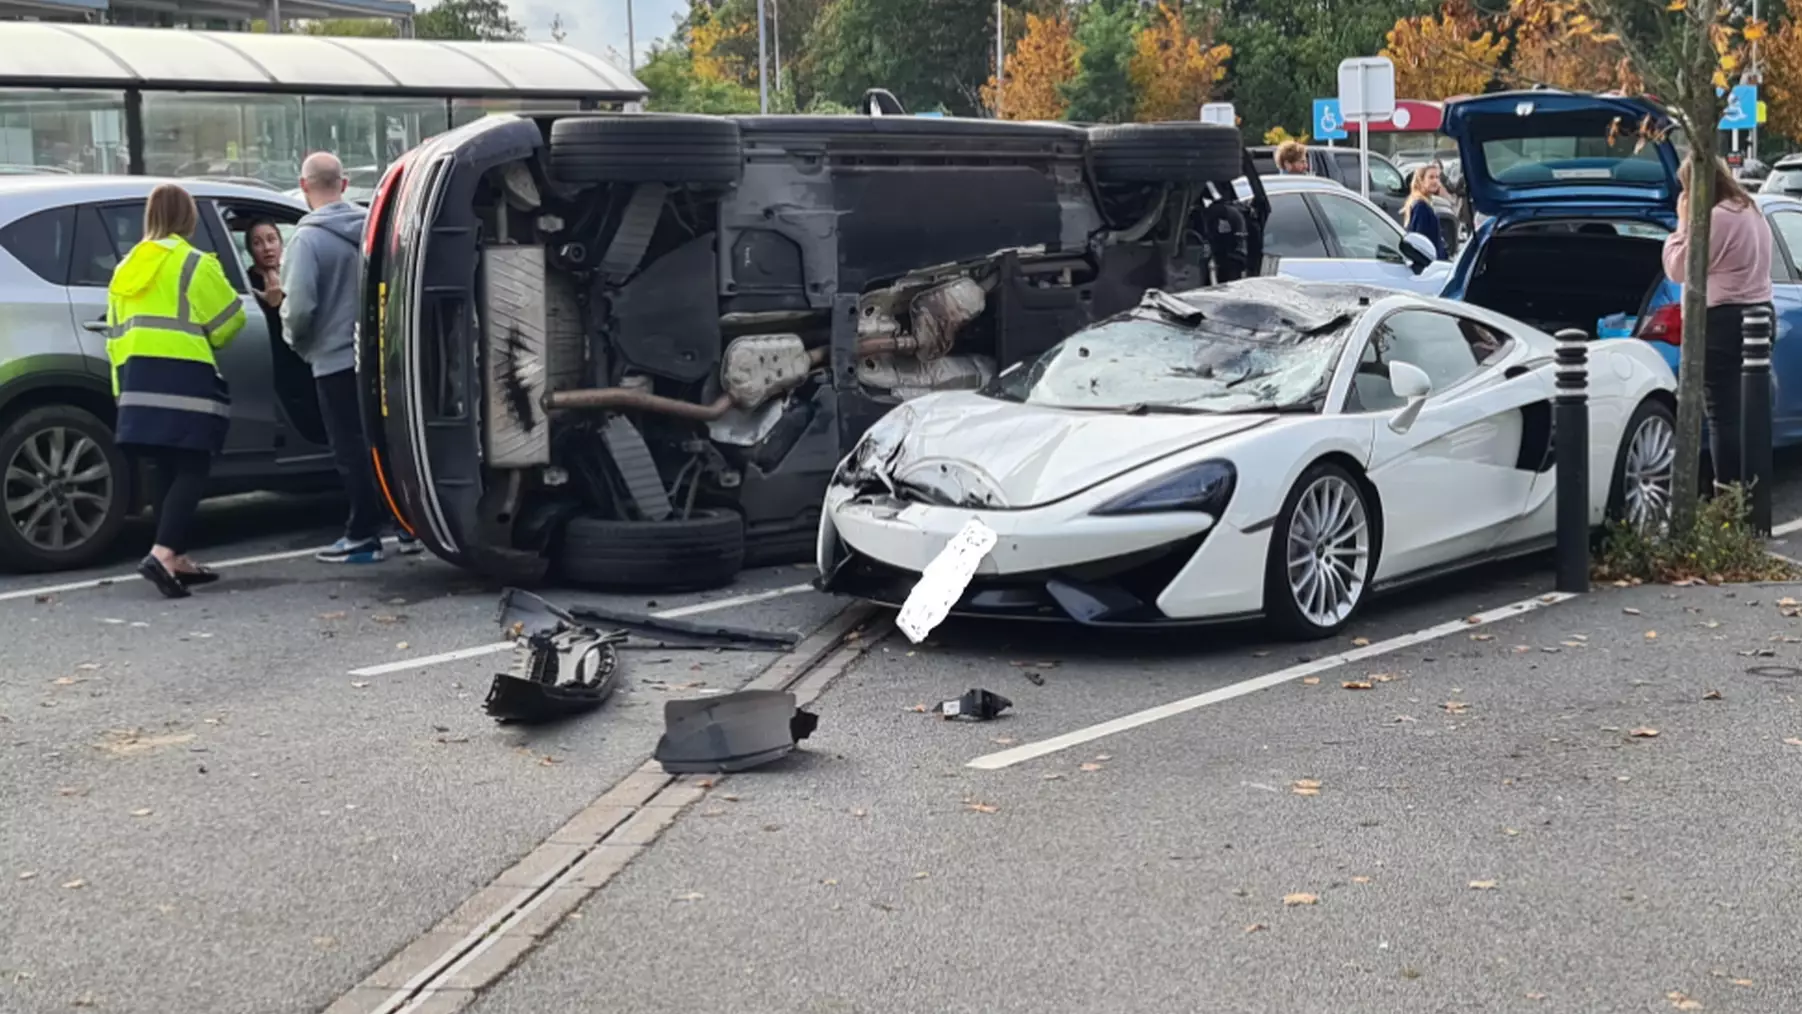 McLaren Left Badly Damaged After Run-In With Audi In Supermarket Carpark 